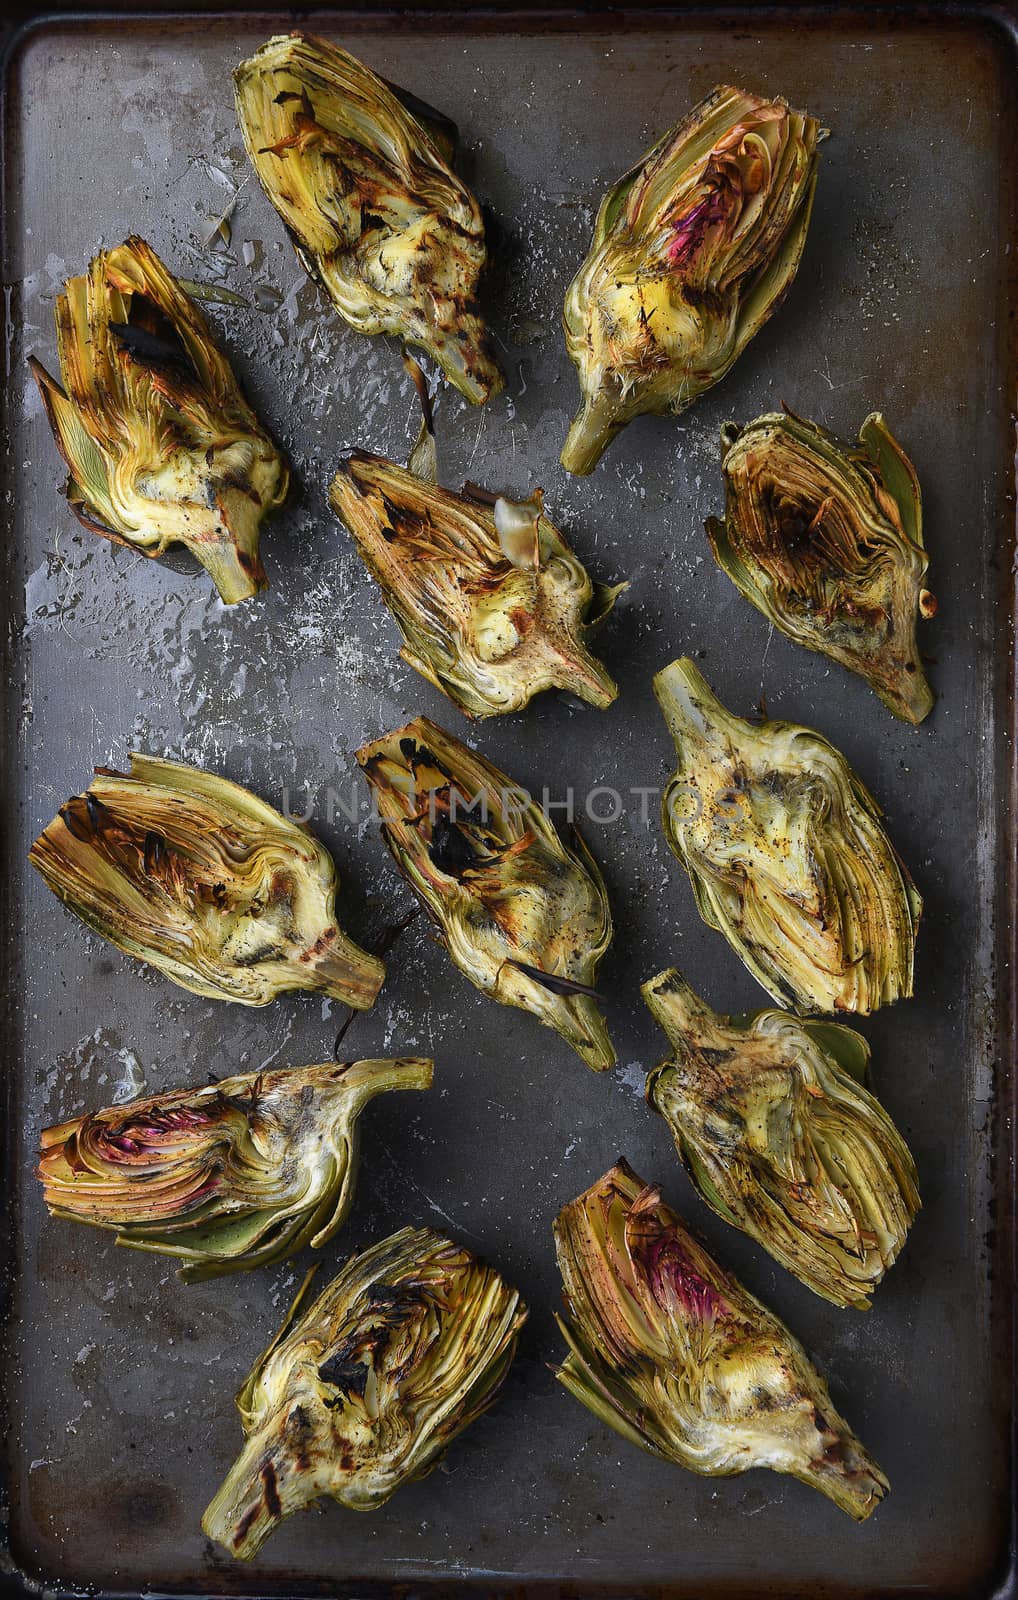 High angle view of grilled artichoke halves on a baking sheet.